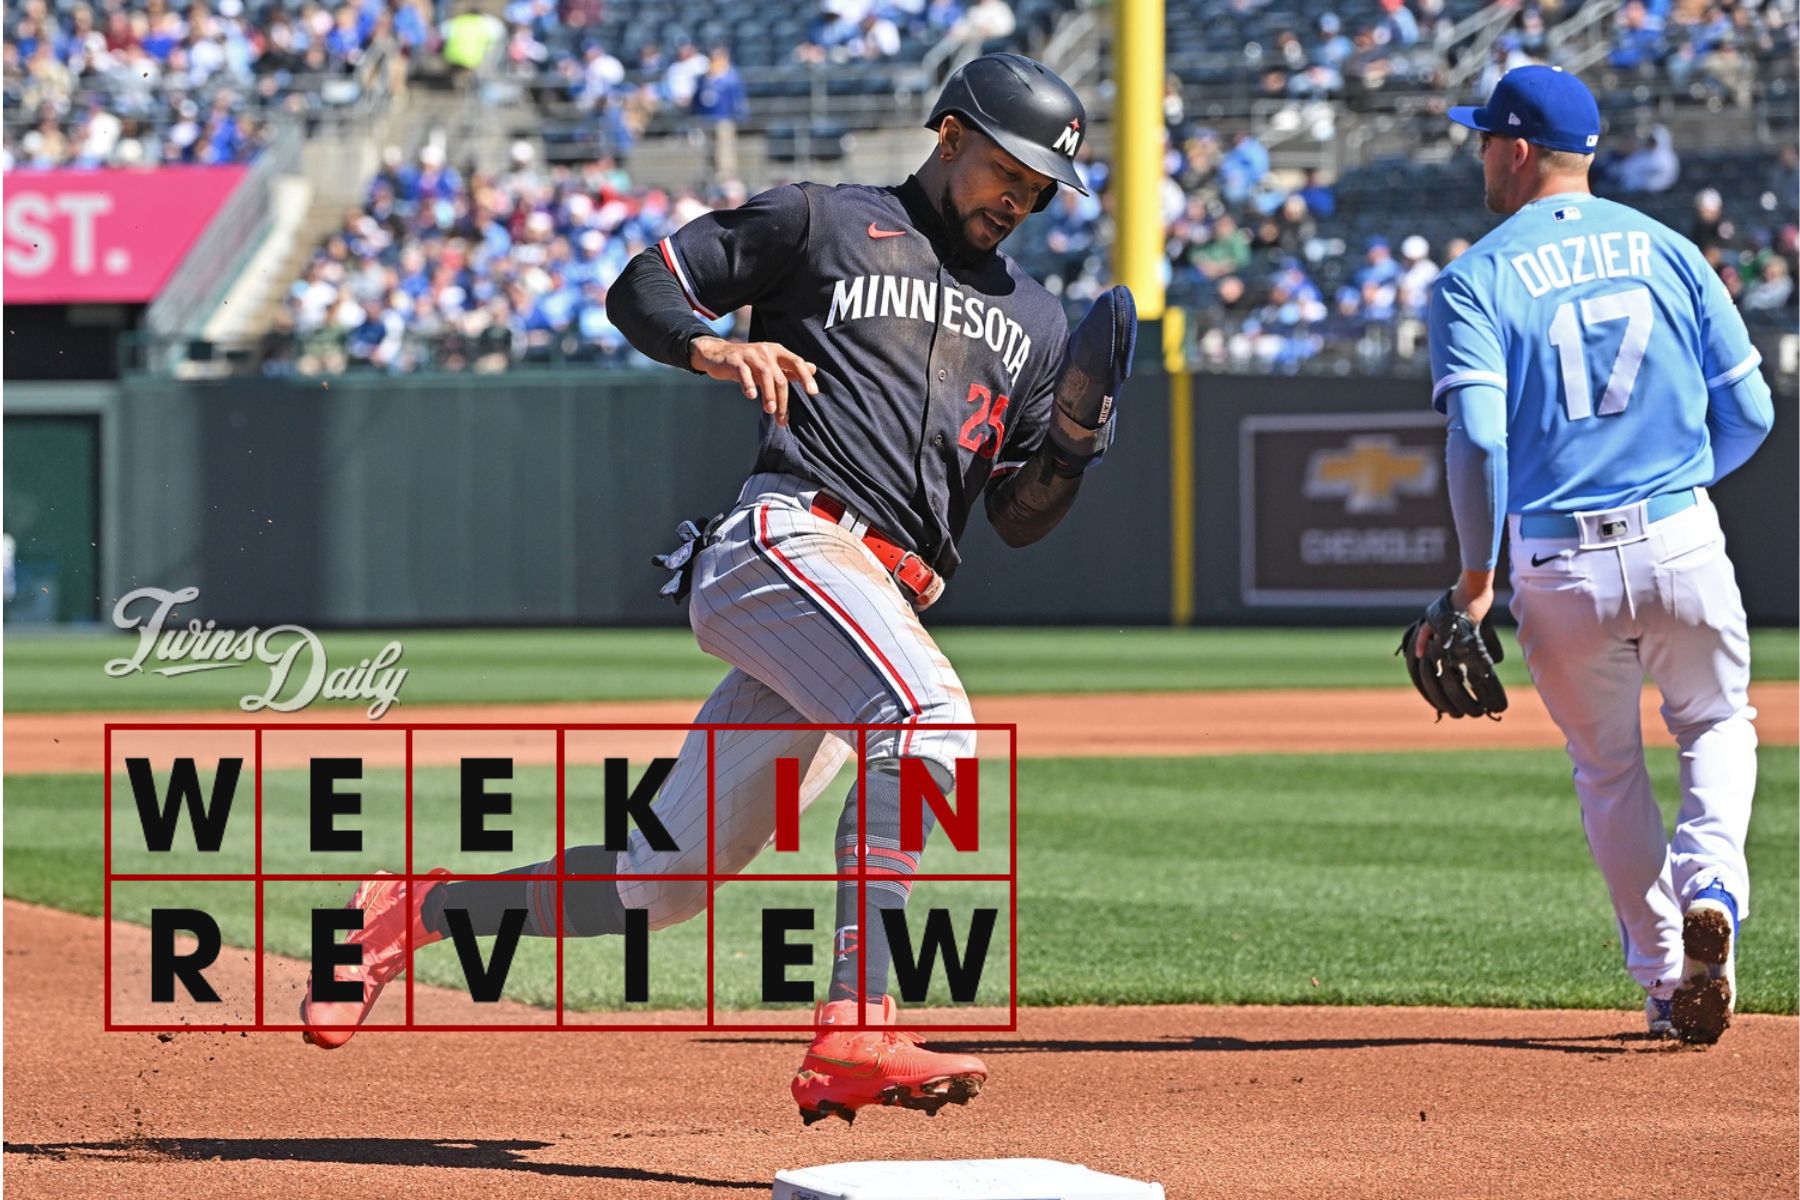 Week in Review Back with a Vengeance - Twins